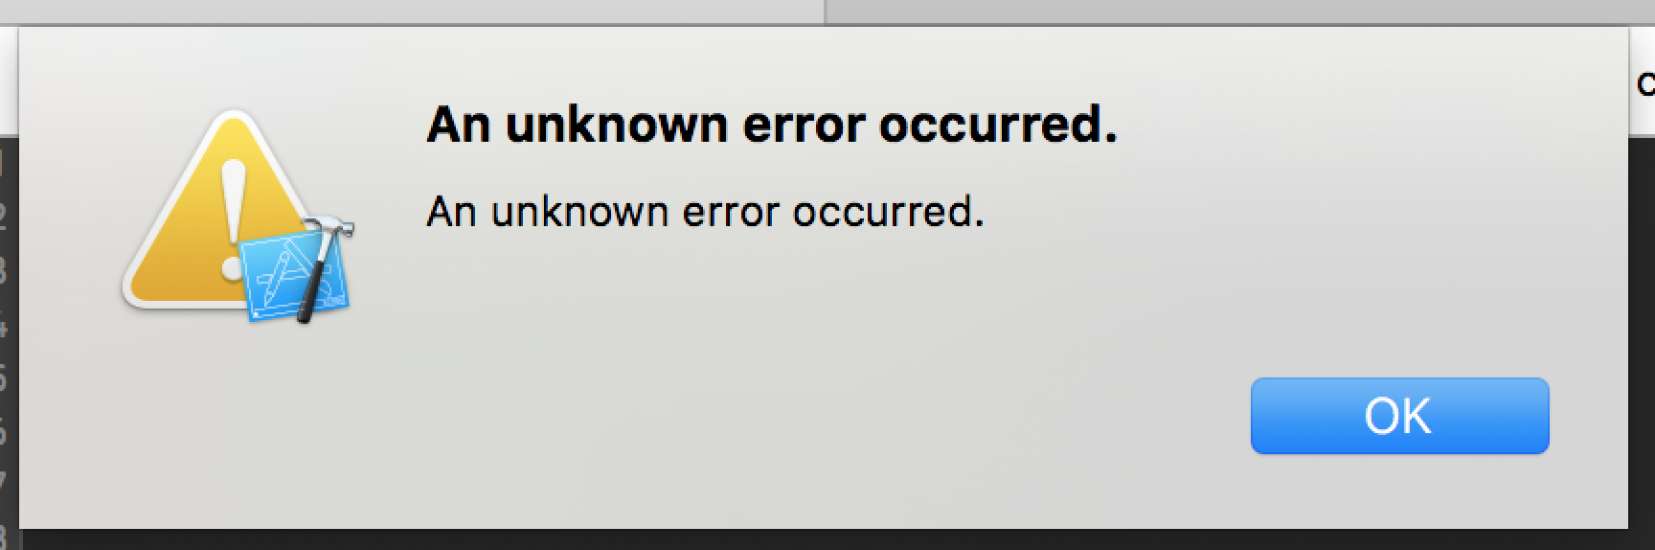 text box displaying an error message that is vague and doesn't provide enough details about why an error occurred. 